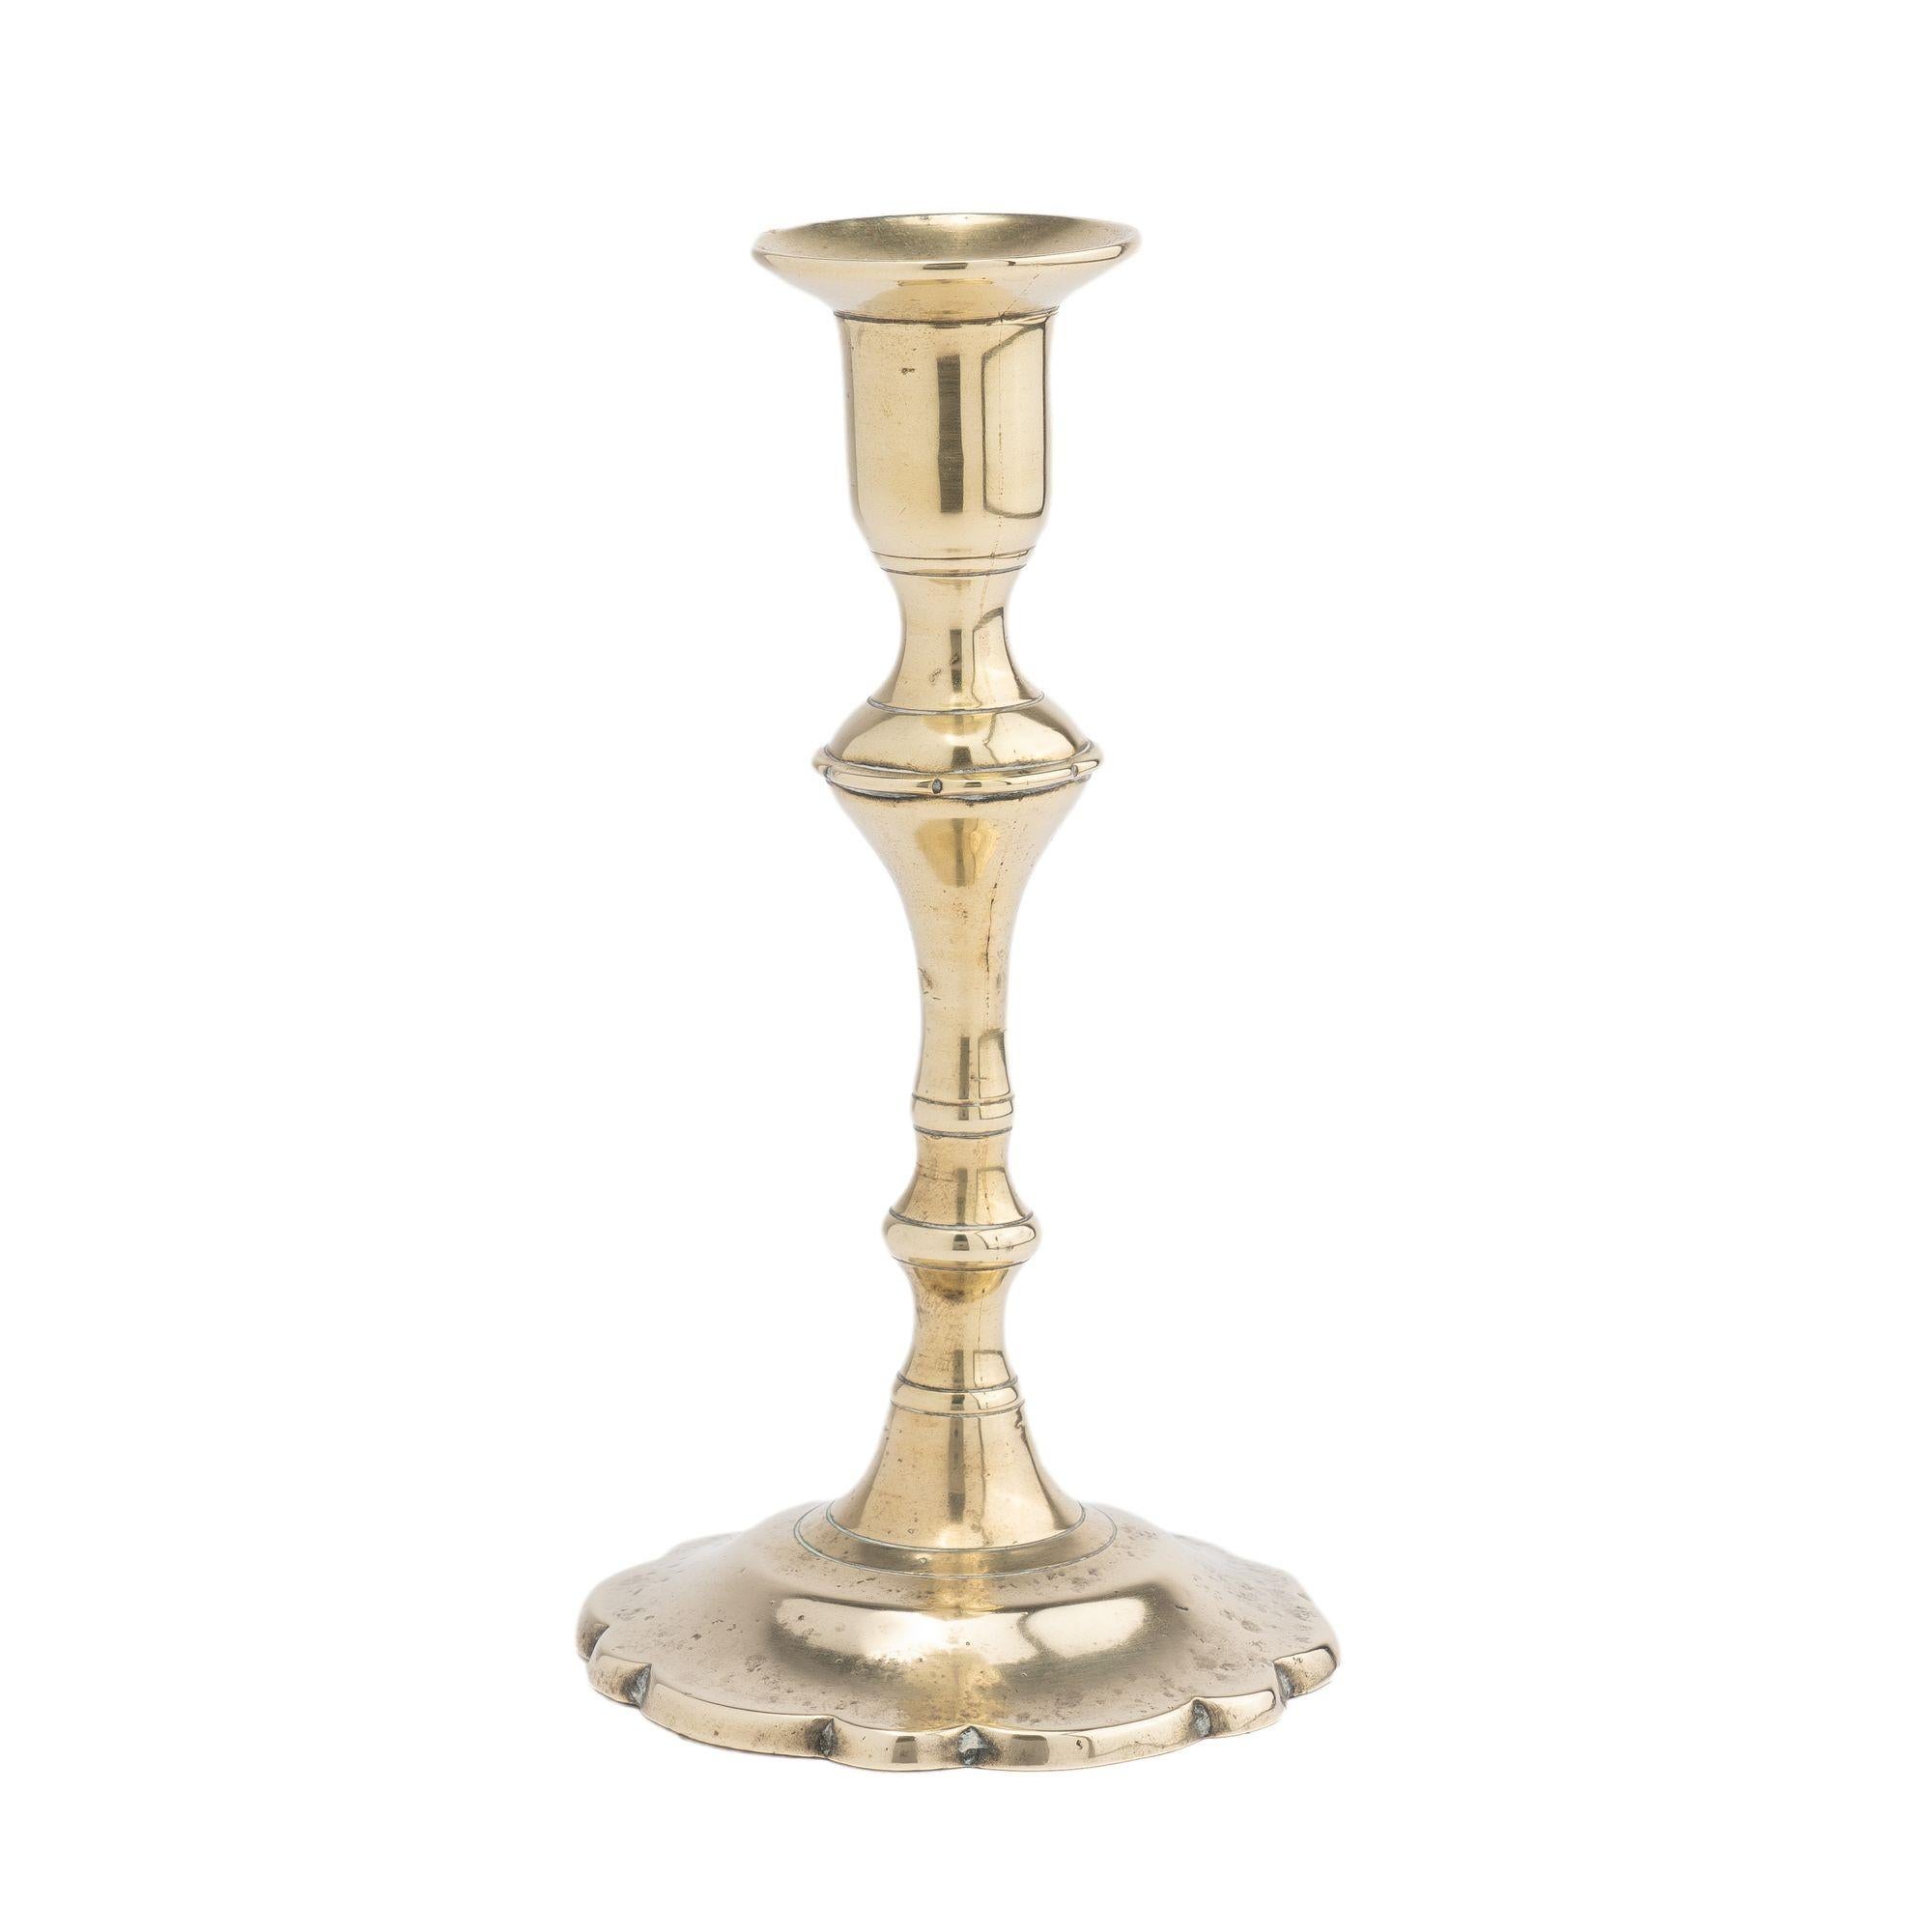 A rare miniature form of seam cast brass Queen Anne petal base candlestick with urn form candle cup. The candlestick has been cast with a bobeche, a trumpet form shaft with suppressed knob peened to a conical form, and centered on dished circular